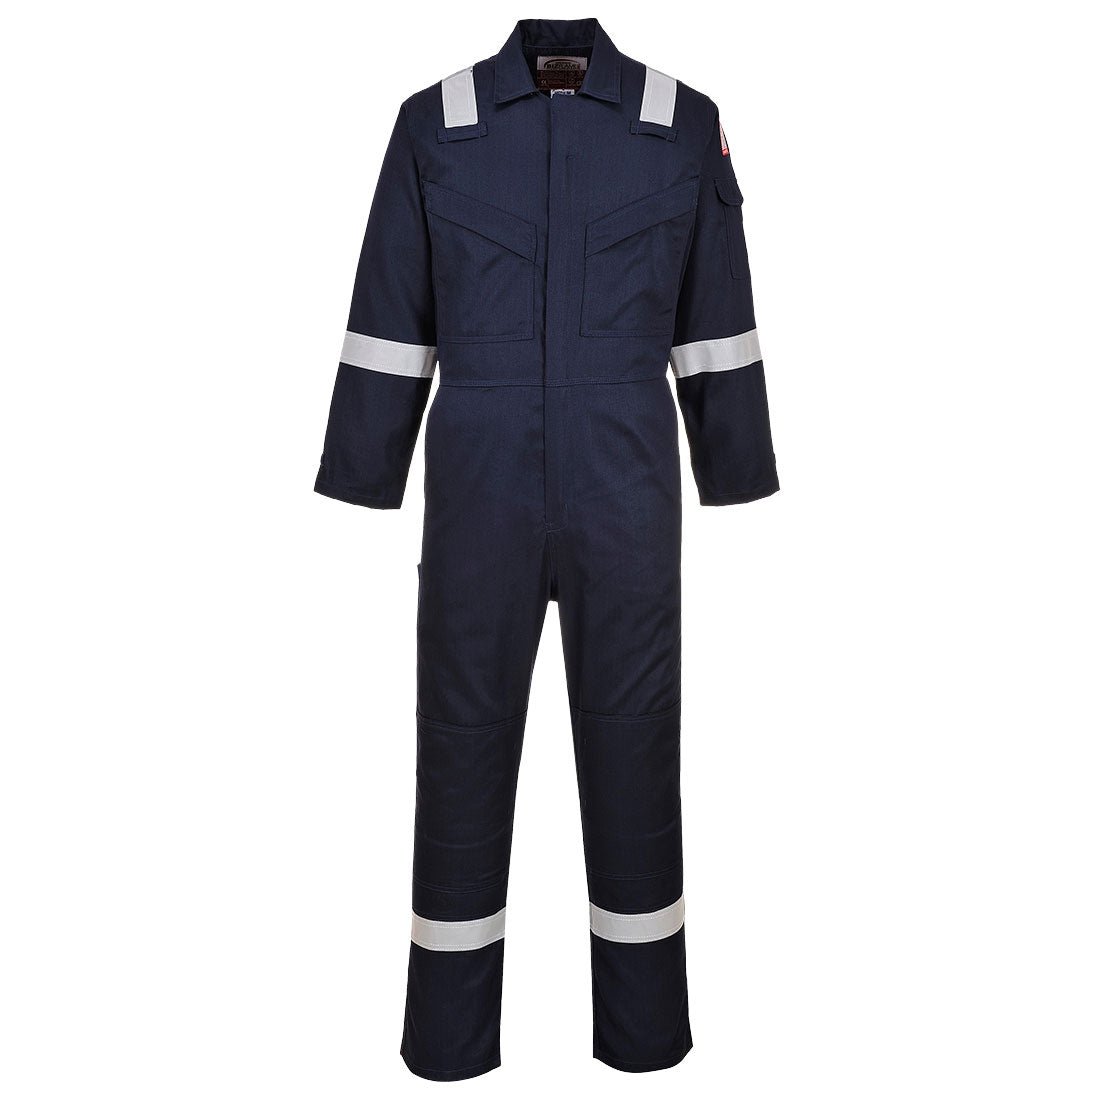 Flame Resistant Light Weight Anti-Static Coverall 280g - arbeitskleidung-gmbh